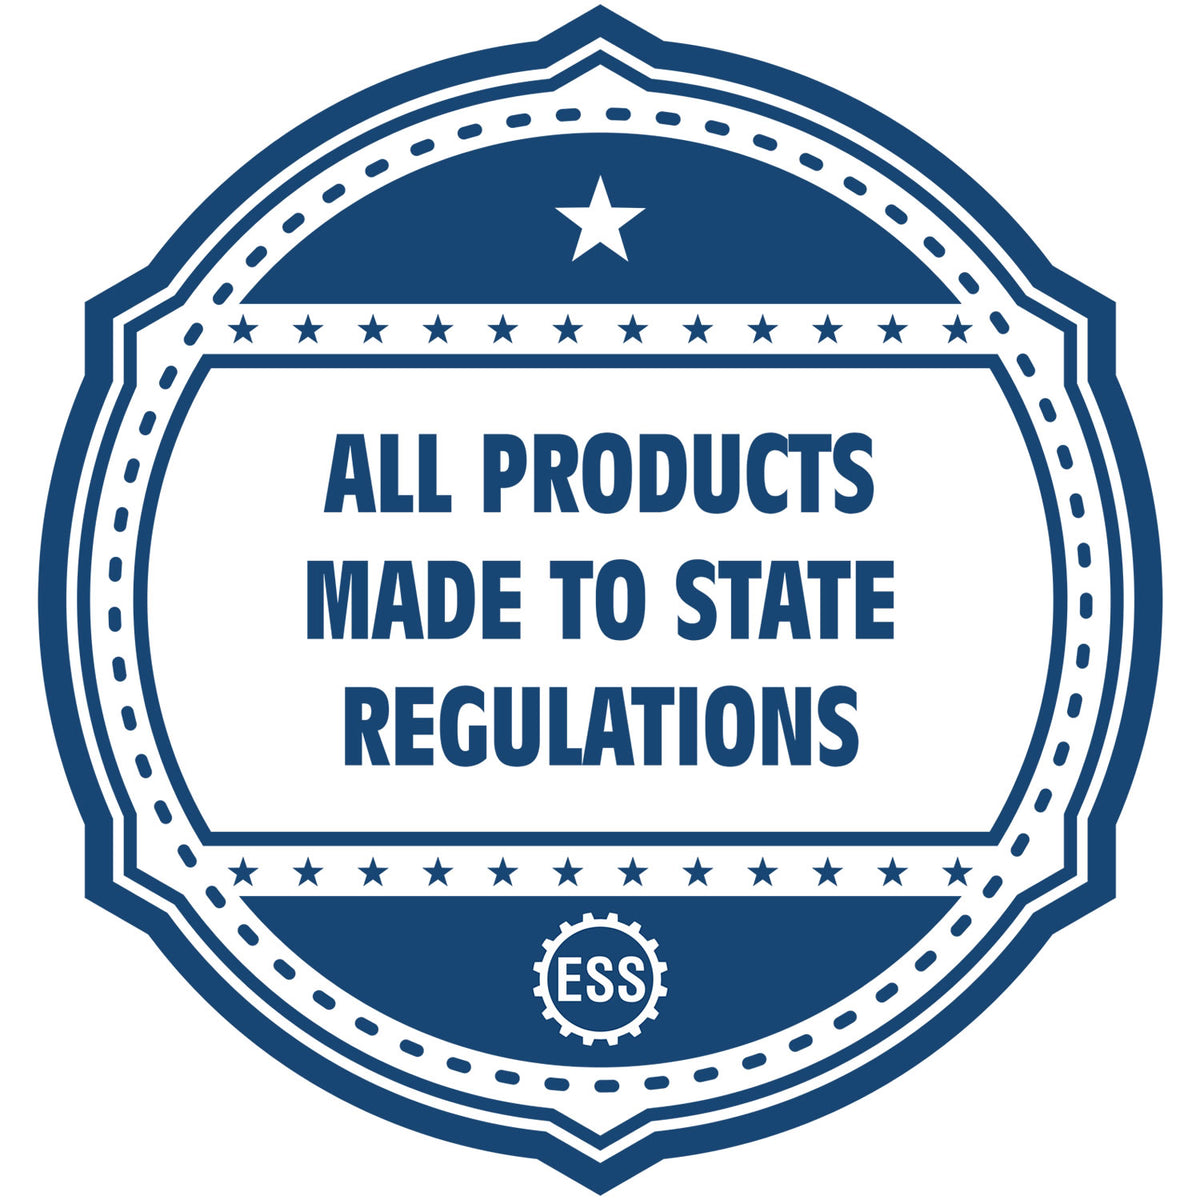 An icon or badge element for the State of Pennsylvania Extended Long Reach Engineer Seal showing that this product is made in compliance with state regulations.